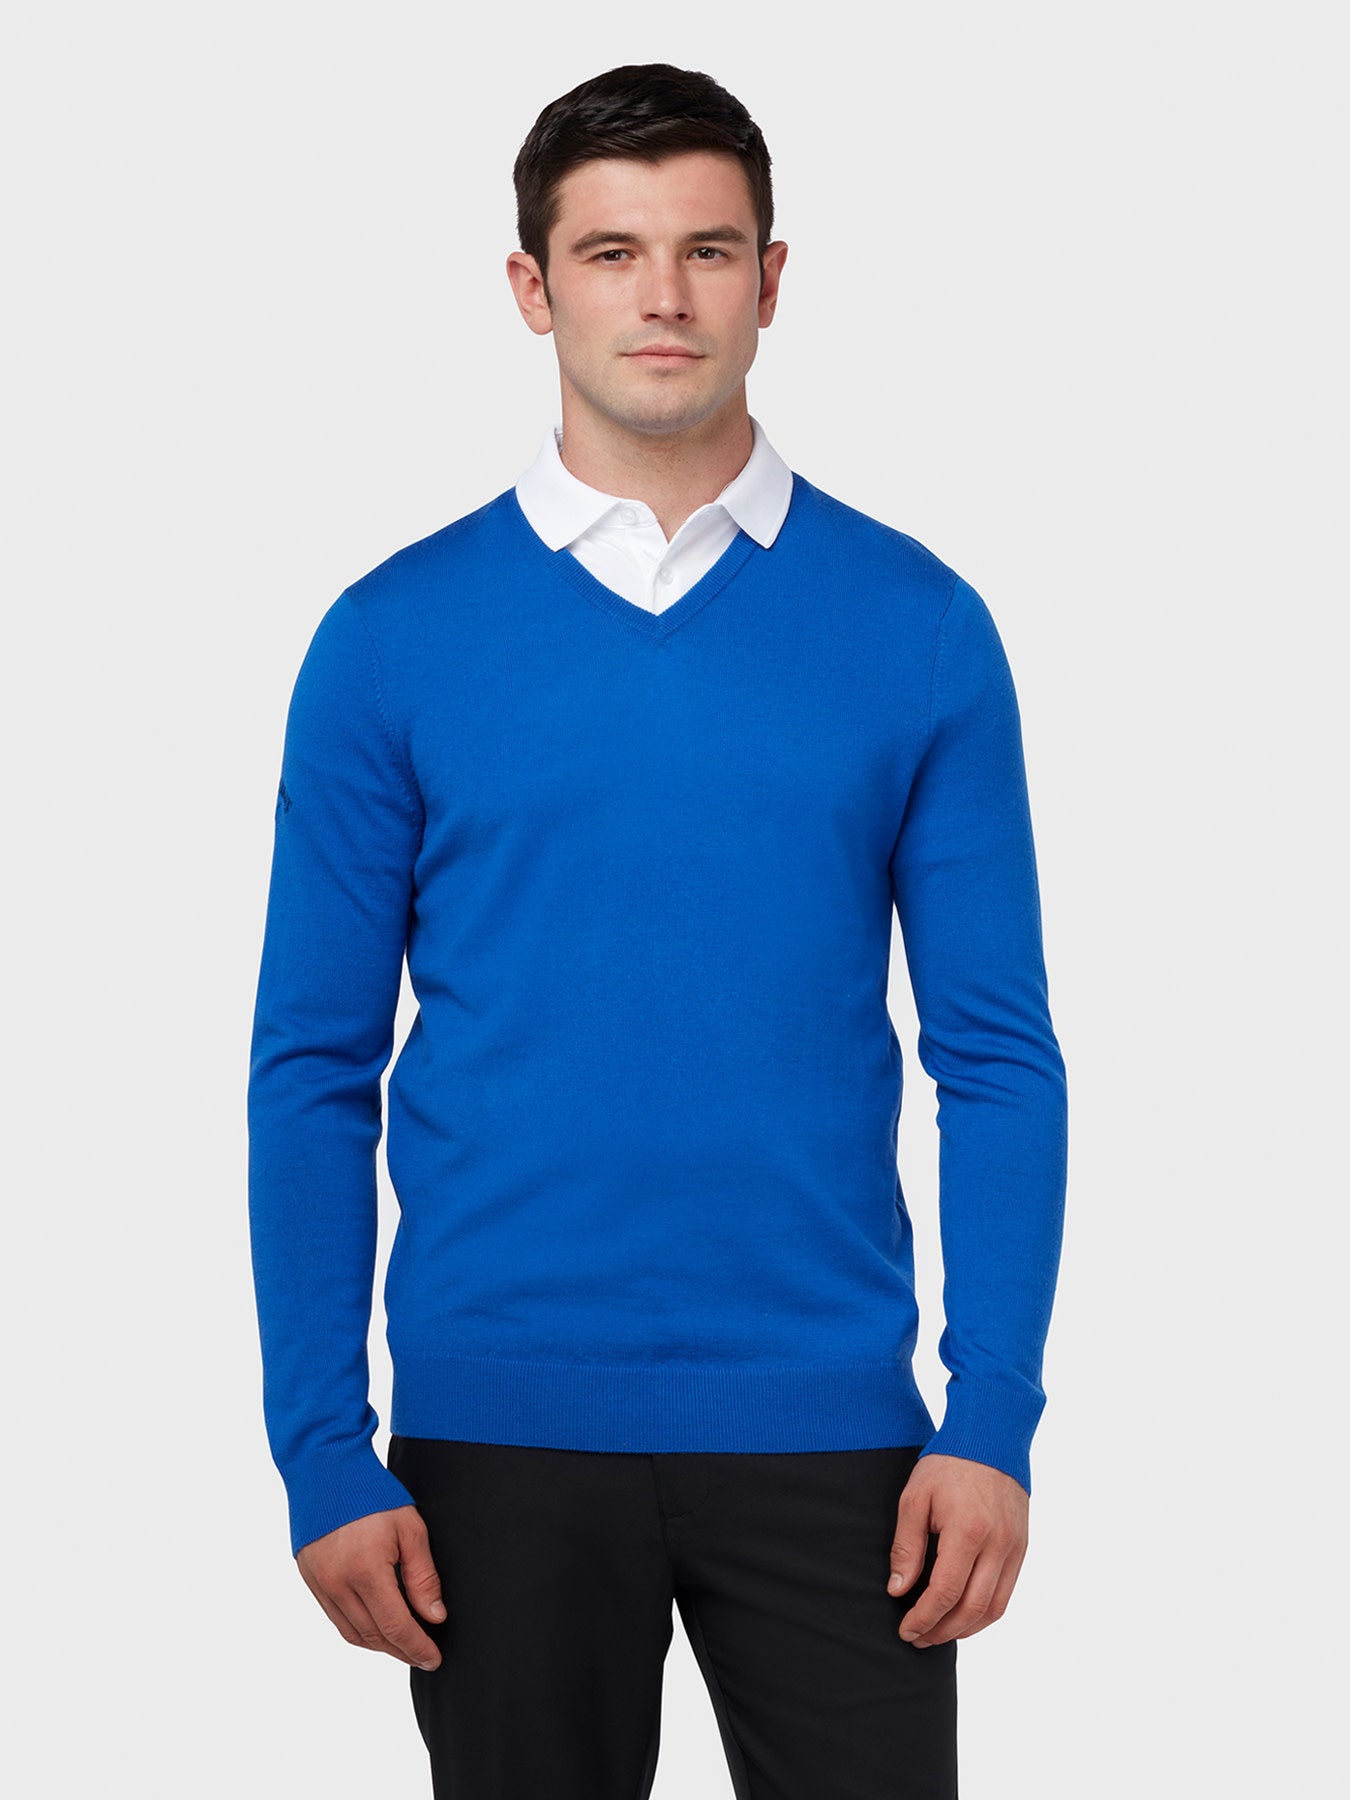 View Thermal Merino Wool VNeck Sweater In Surfing Blue Surfing Blue XL information